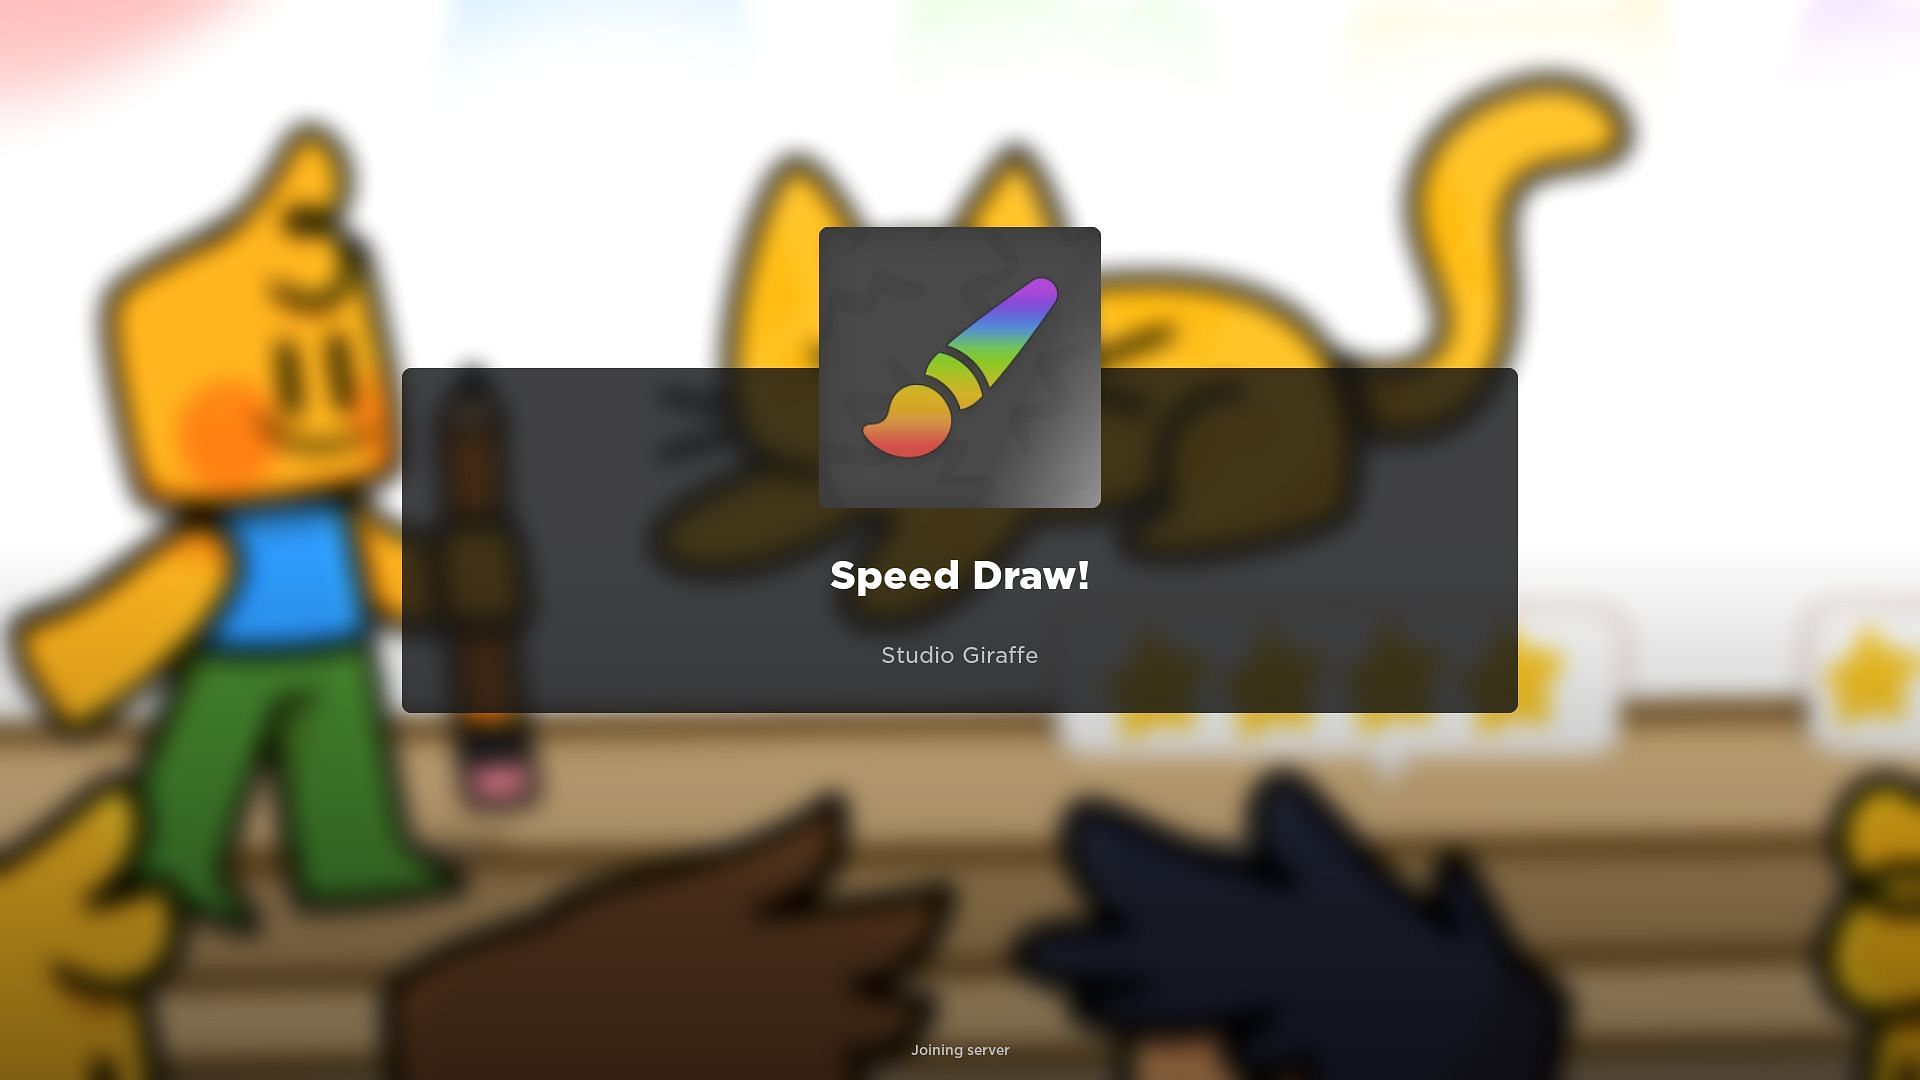 Are there any active codes for Speed Draw?